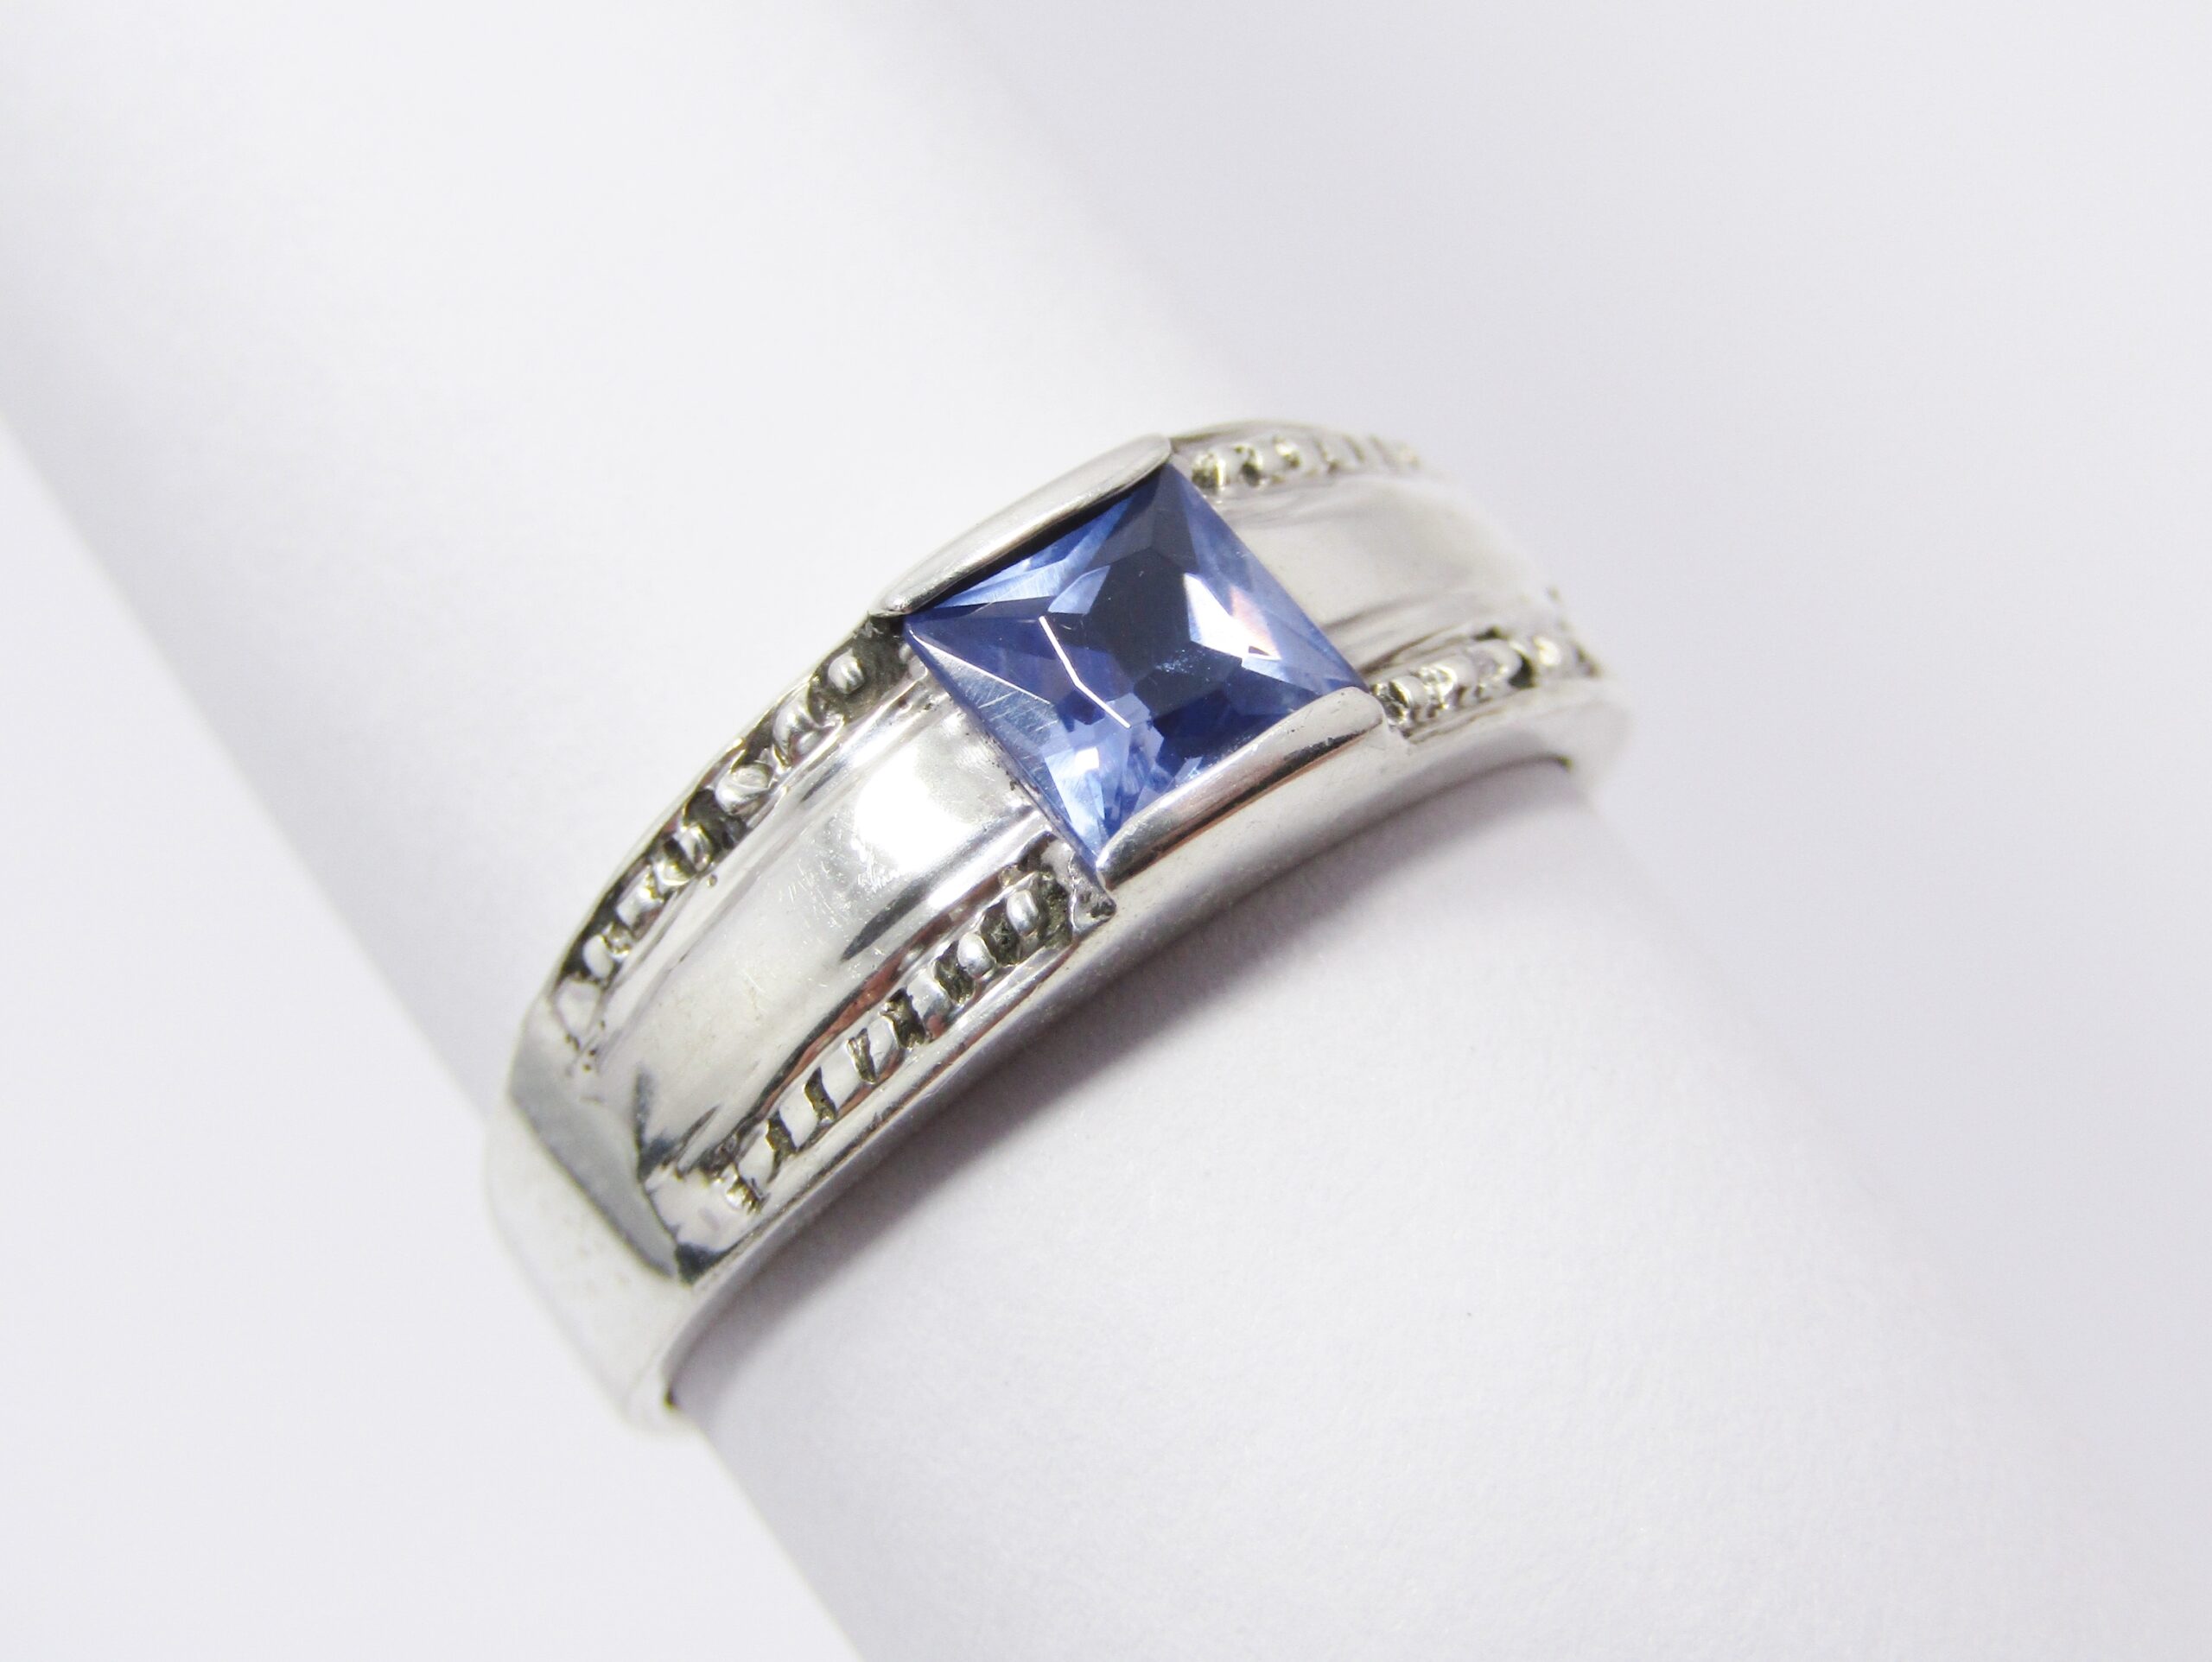 A Very Pretty Dainty Blue Zirconia Ring in Sterling Silver.